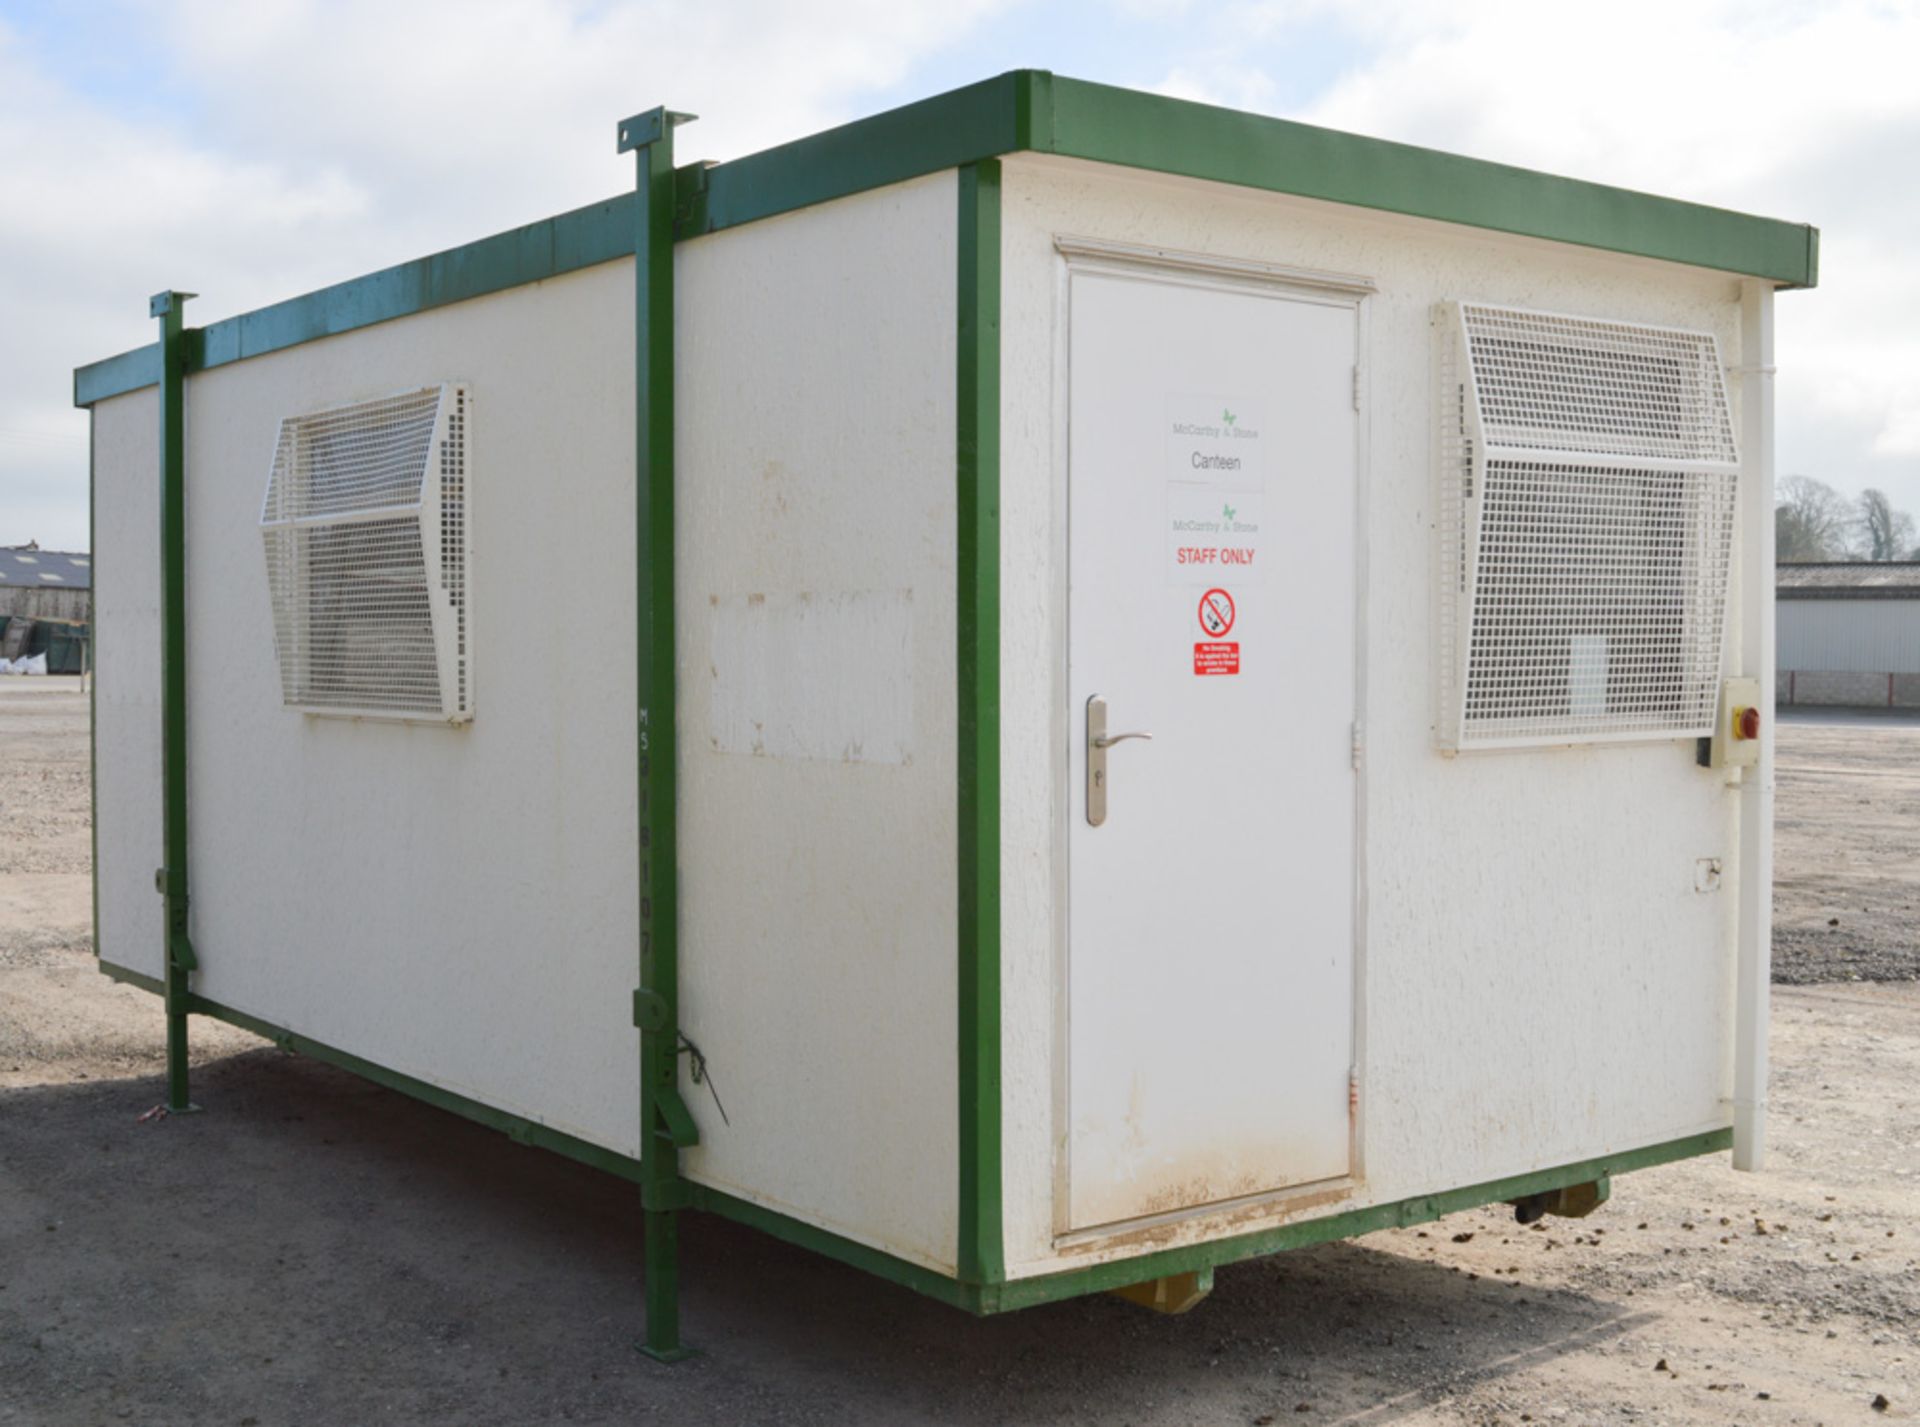 21 ft x 9 ft timber jack leg canteen unit comprising of 2 rooms (Canteen area & cloakroom) c/w keys - Image 2 of 6